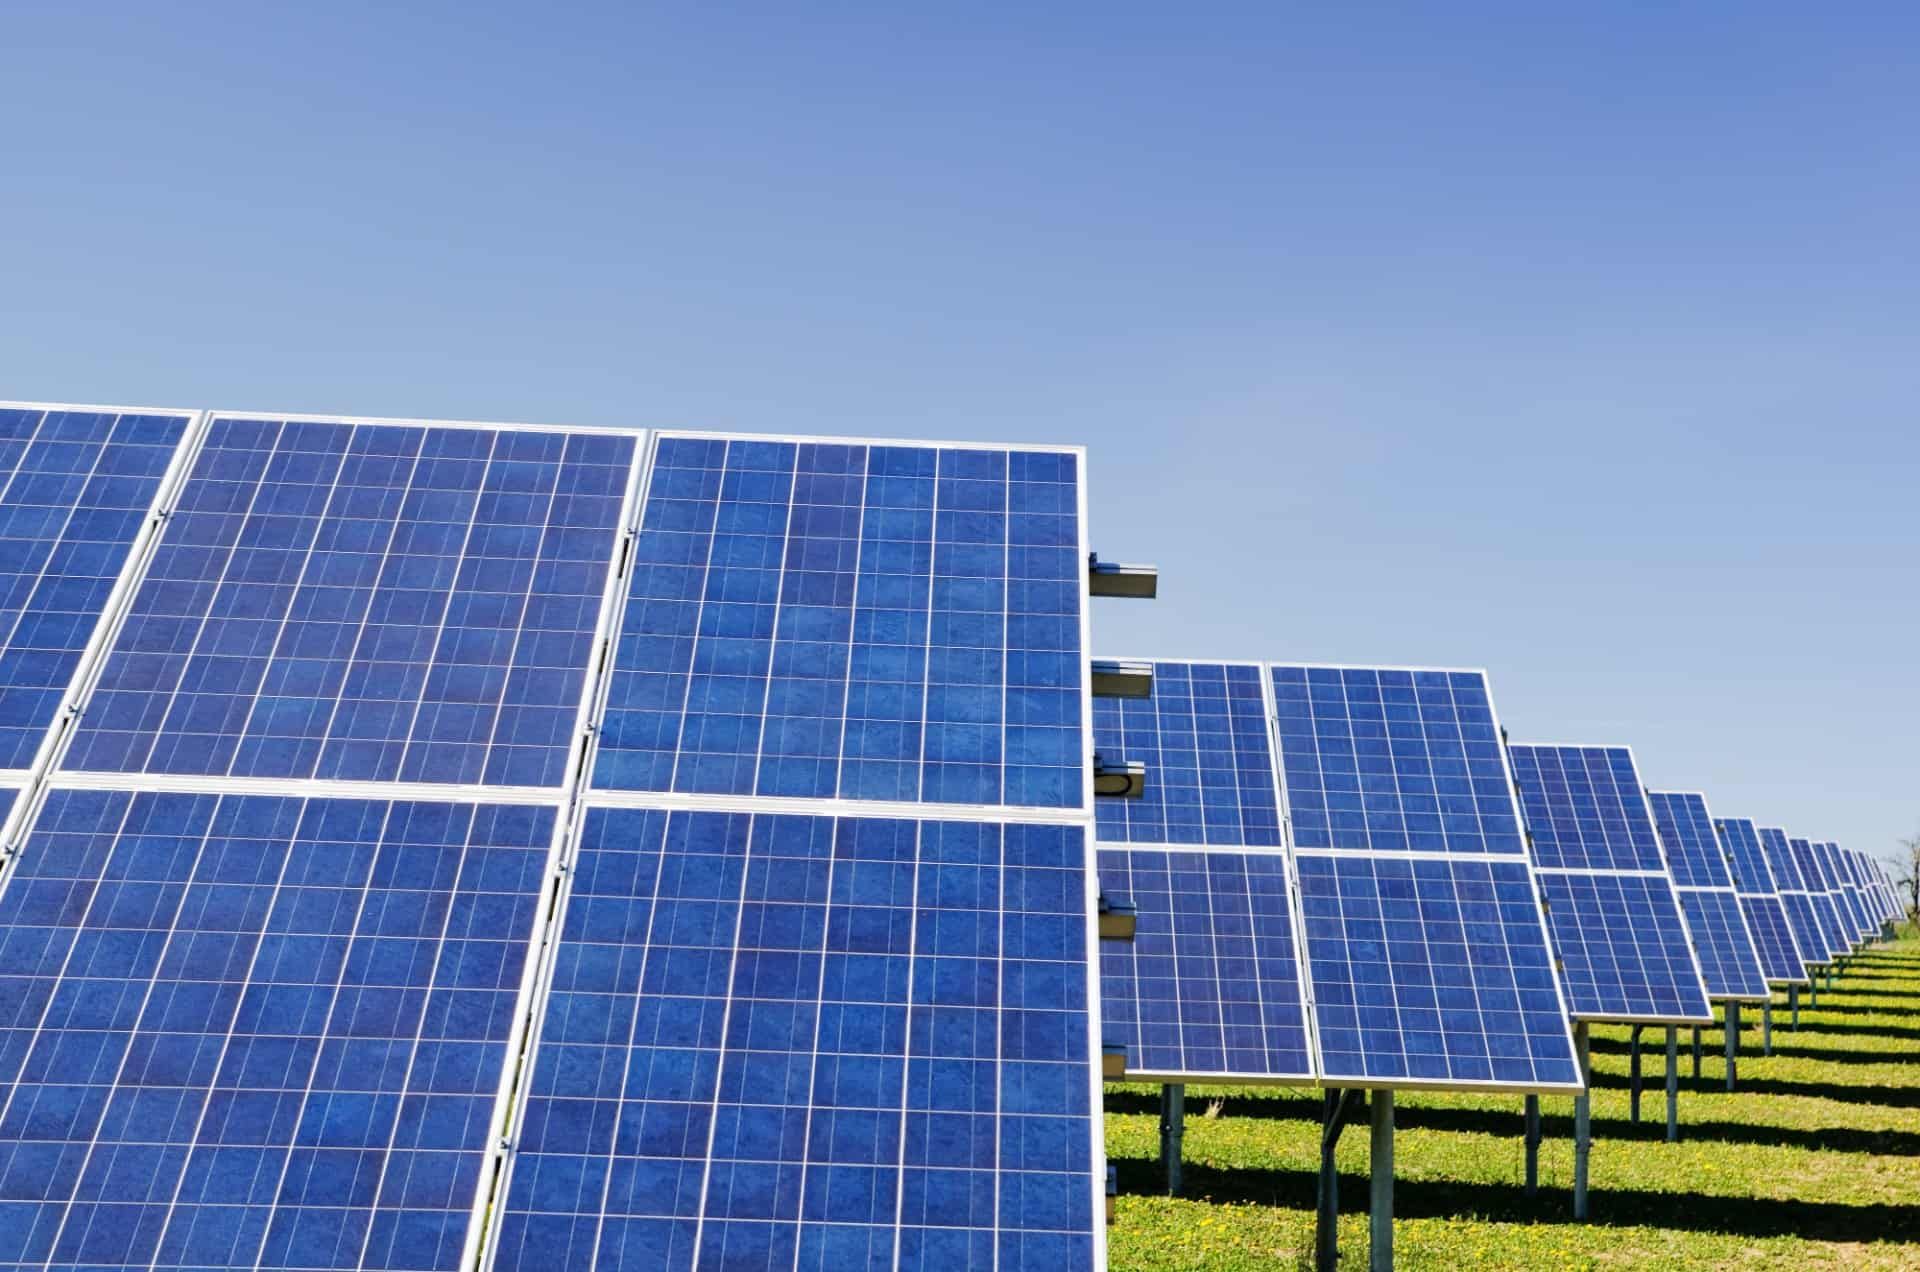 Case study: Power specialist overseeing solar farm chooses DCO to help improve operational efficiency